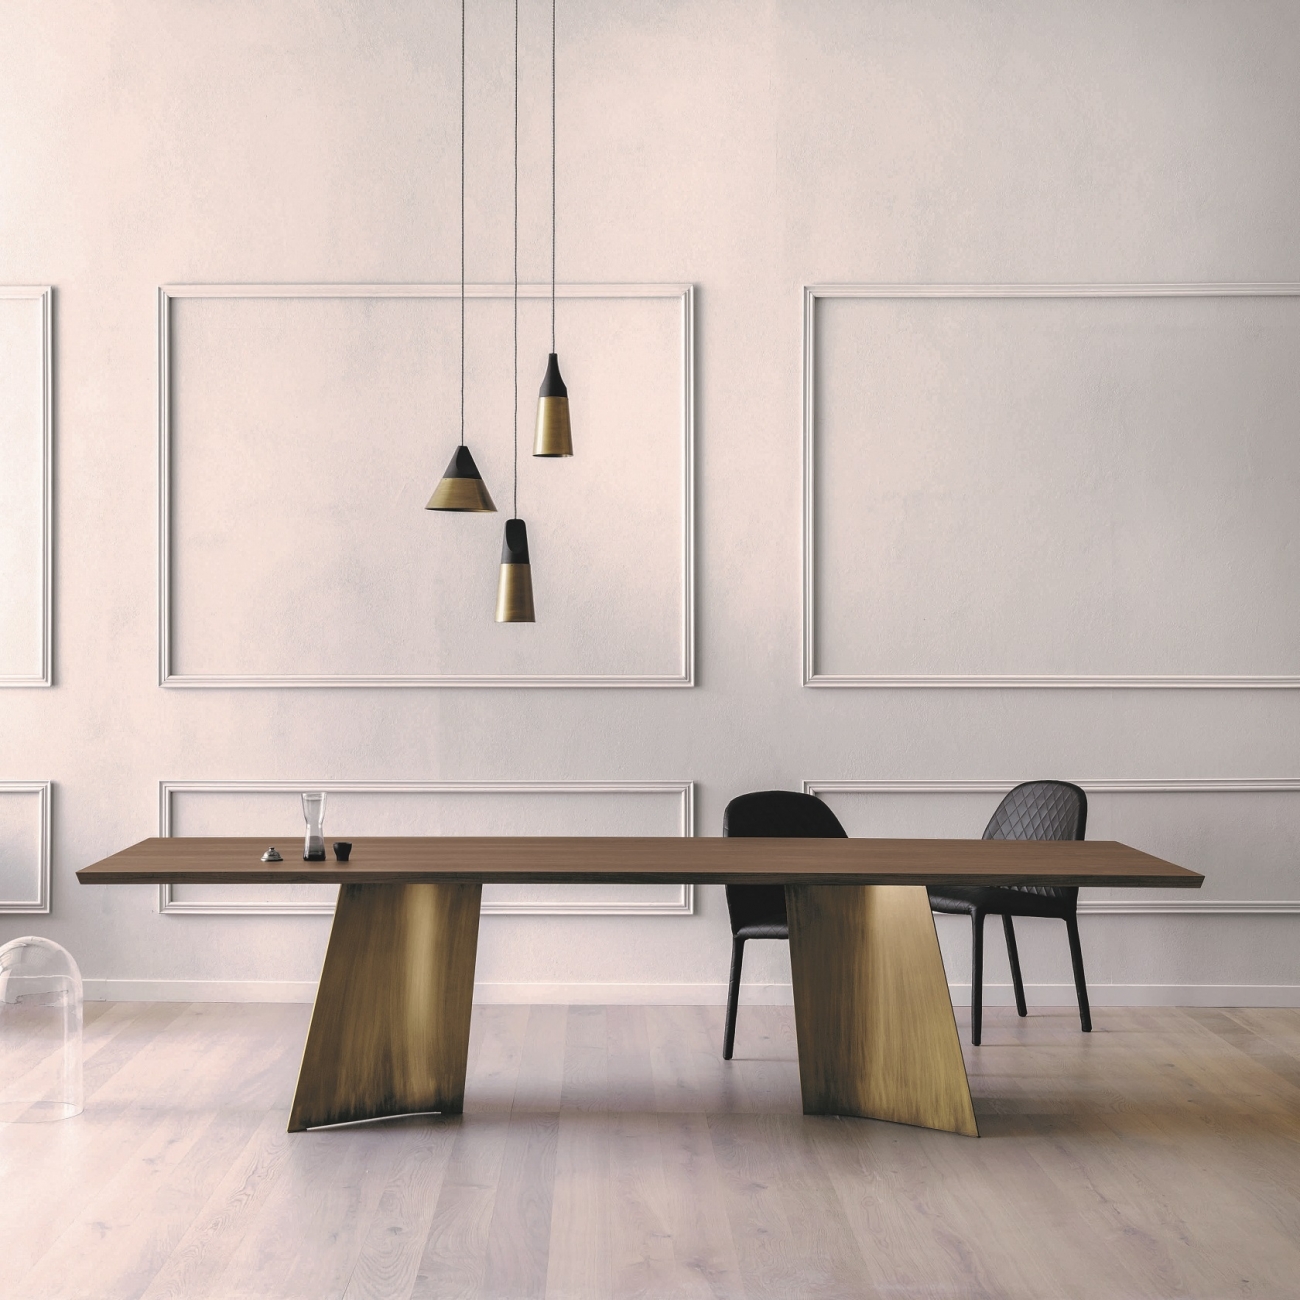 MINIFORMS MAGGESE FIXED DINING TABLE